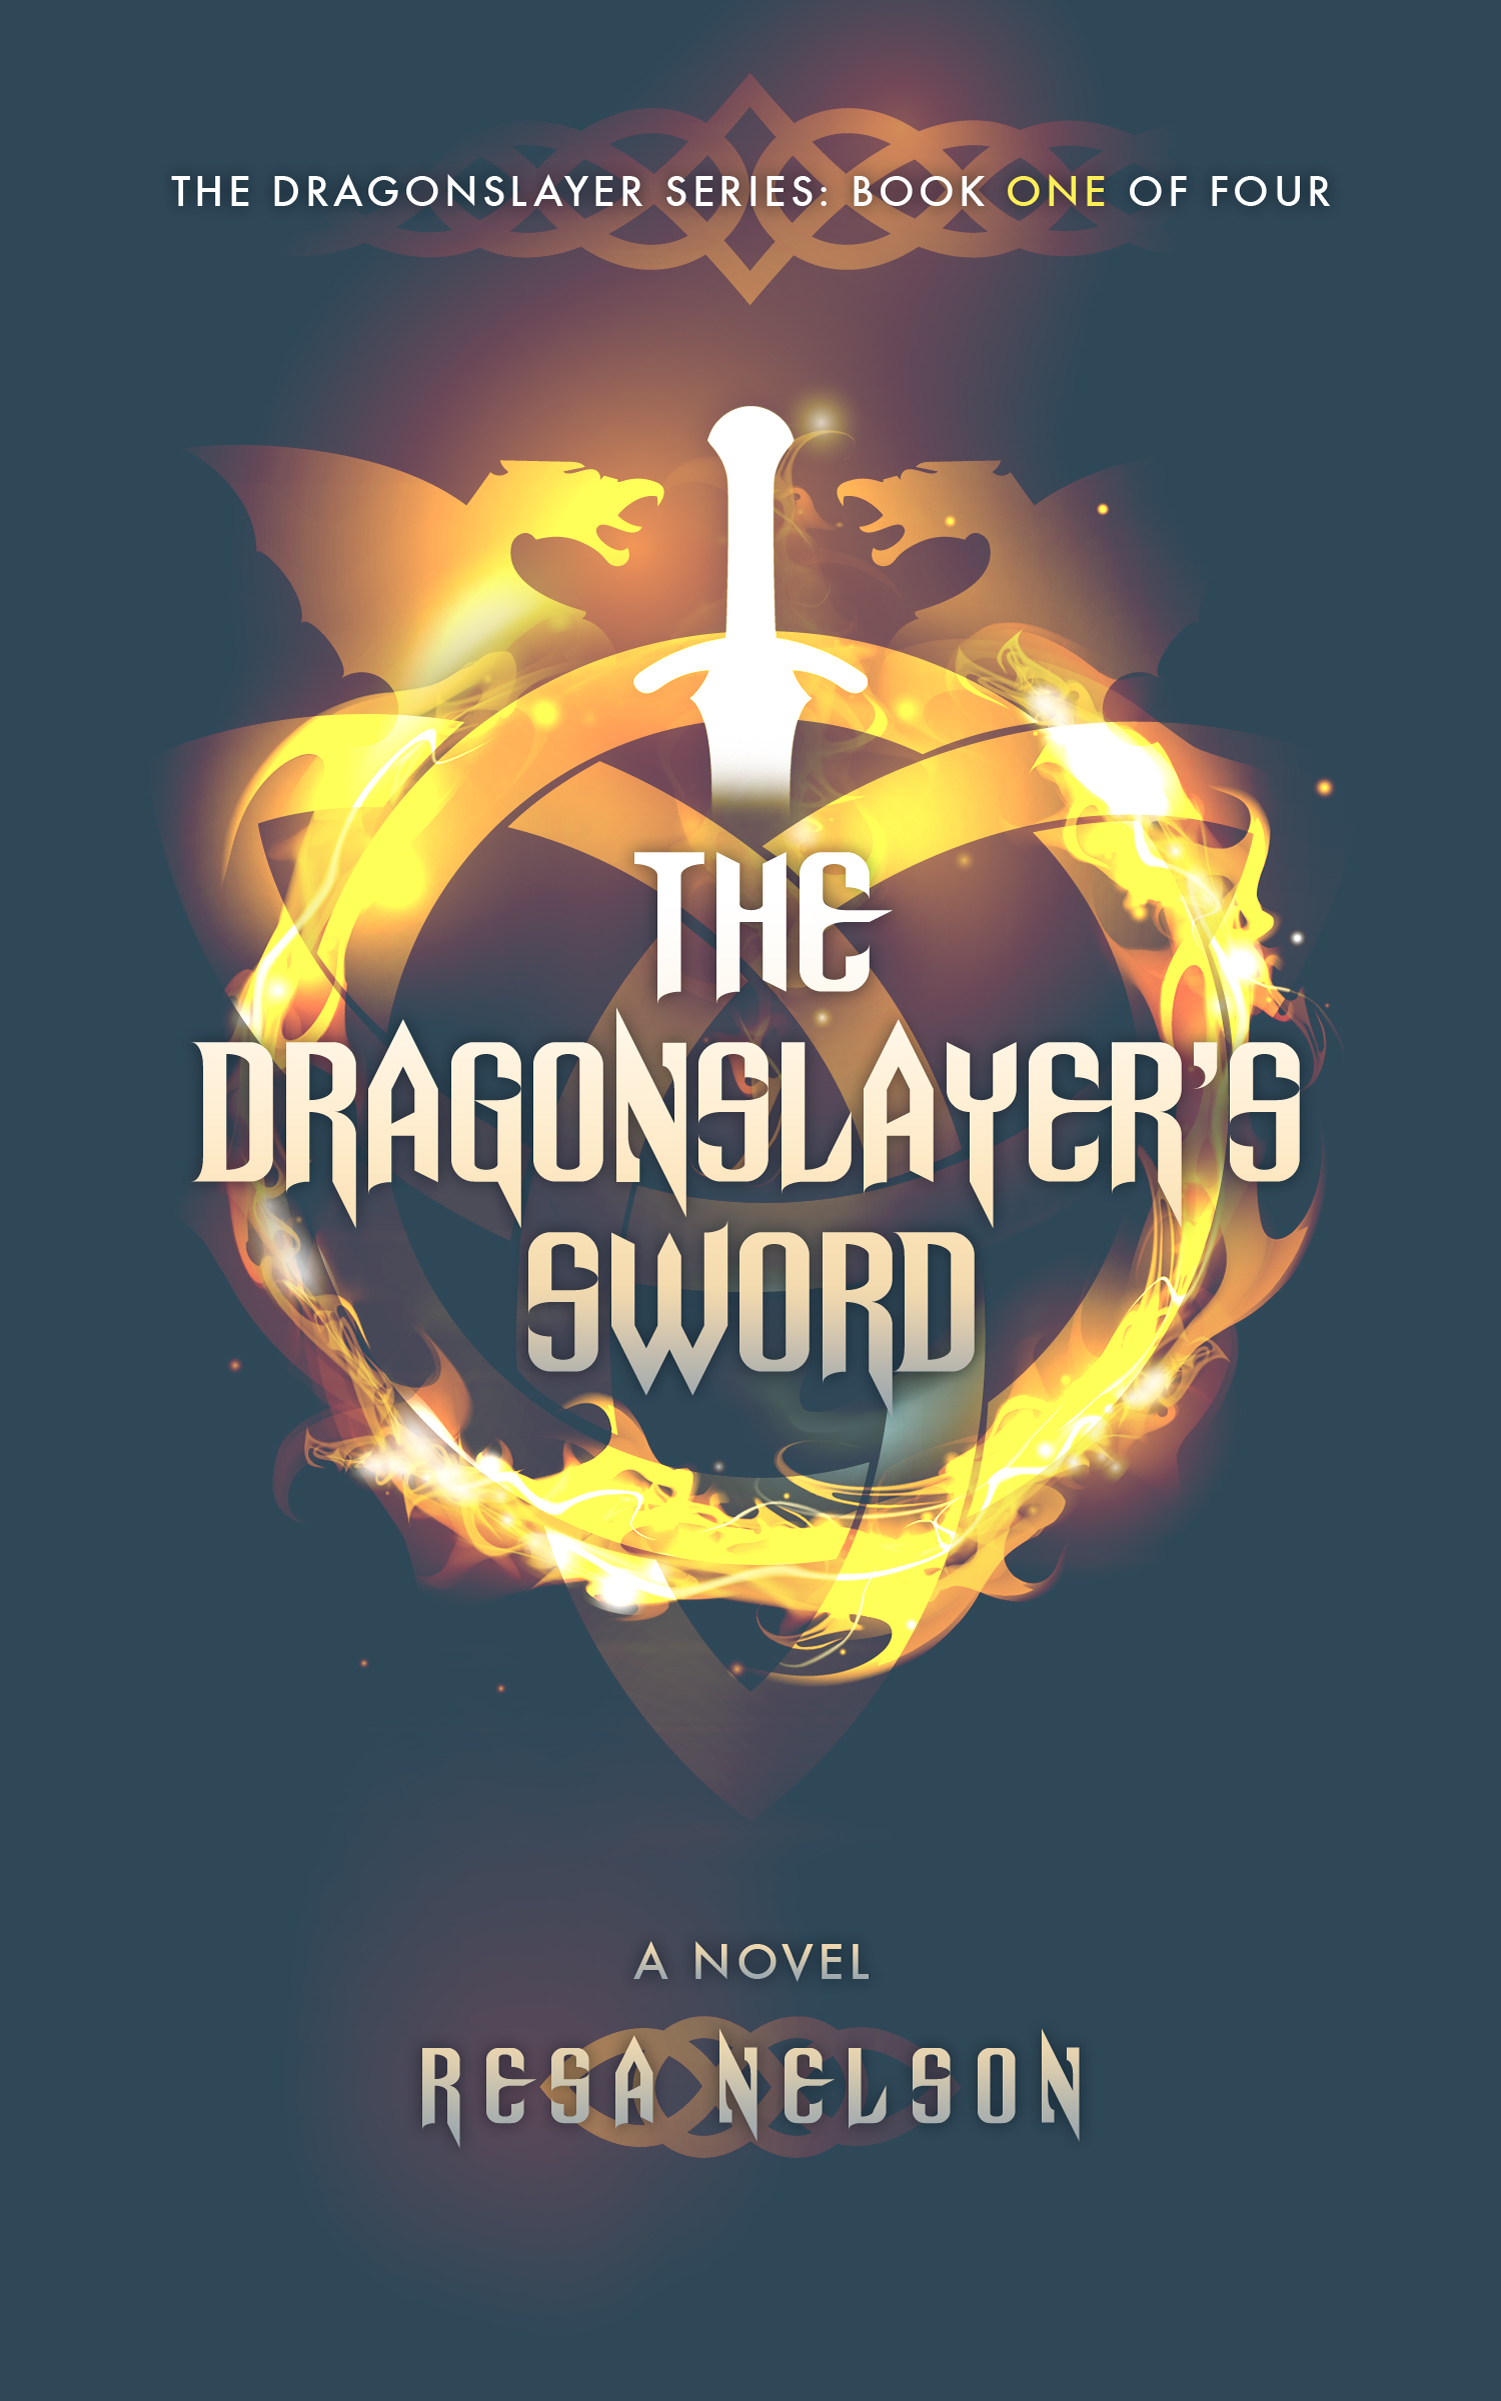 TheDragonslayersSword book cover